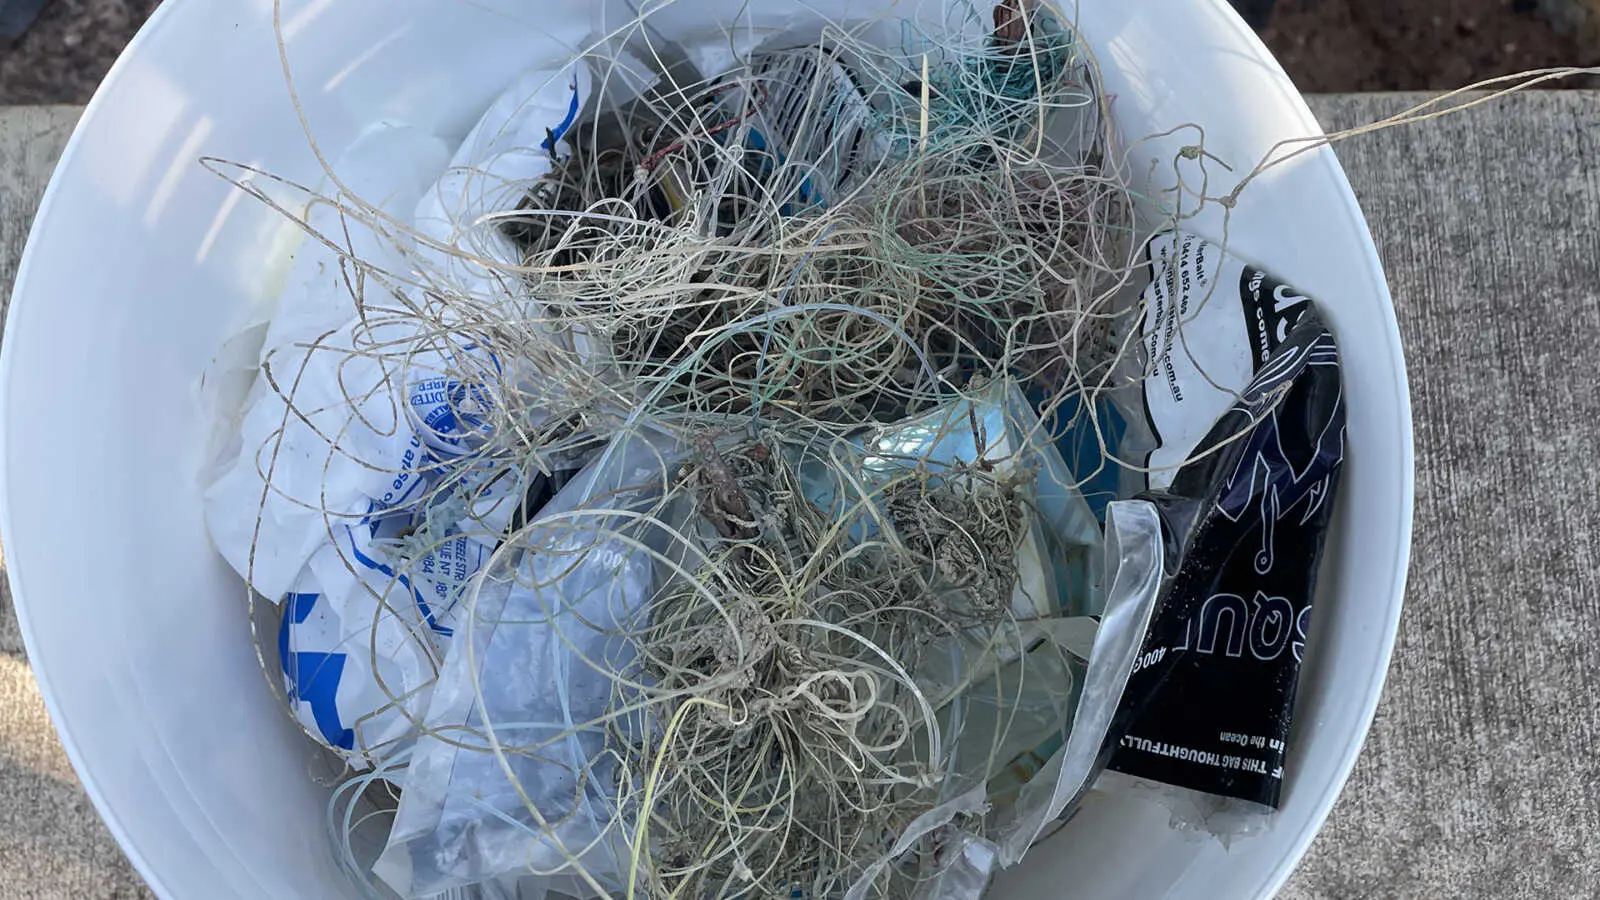 fishing line and other rubbish in a bucket